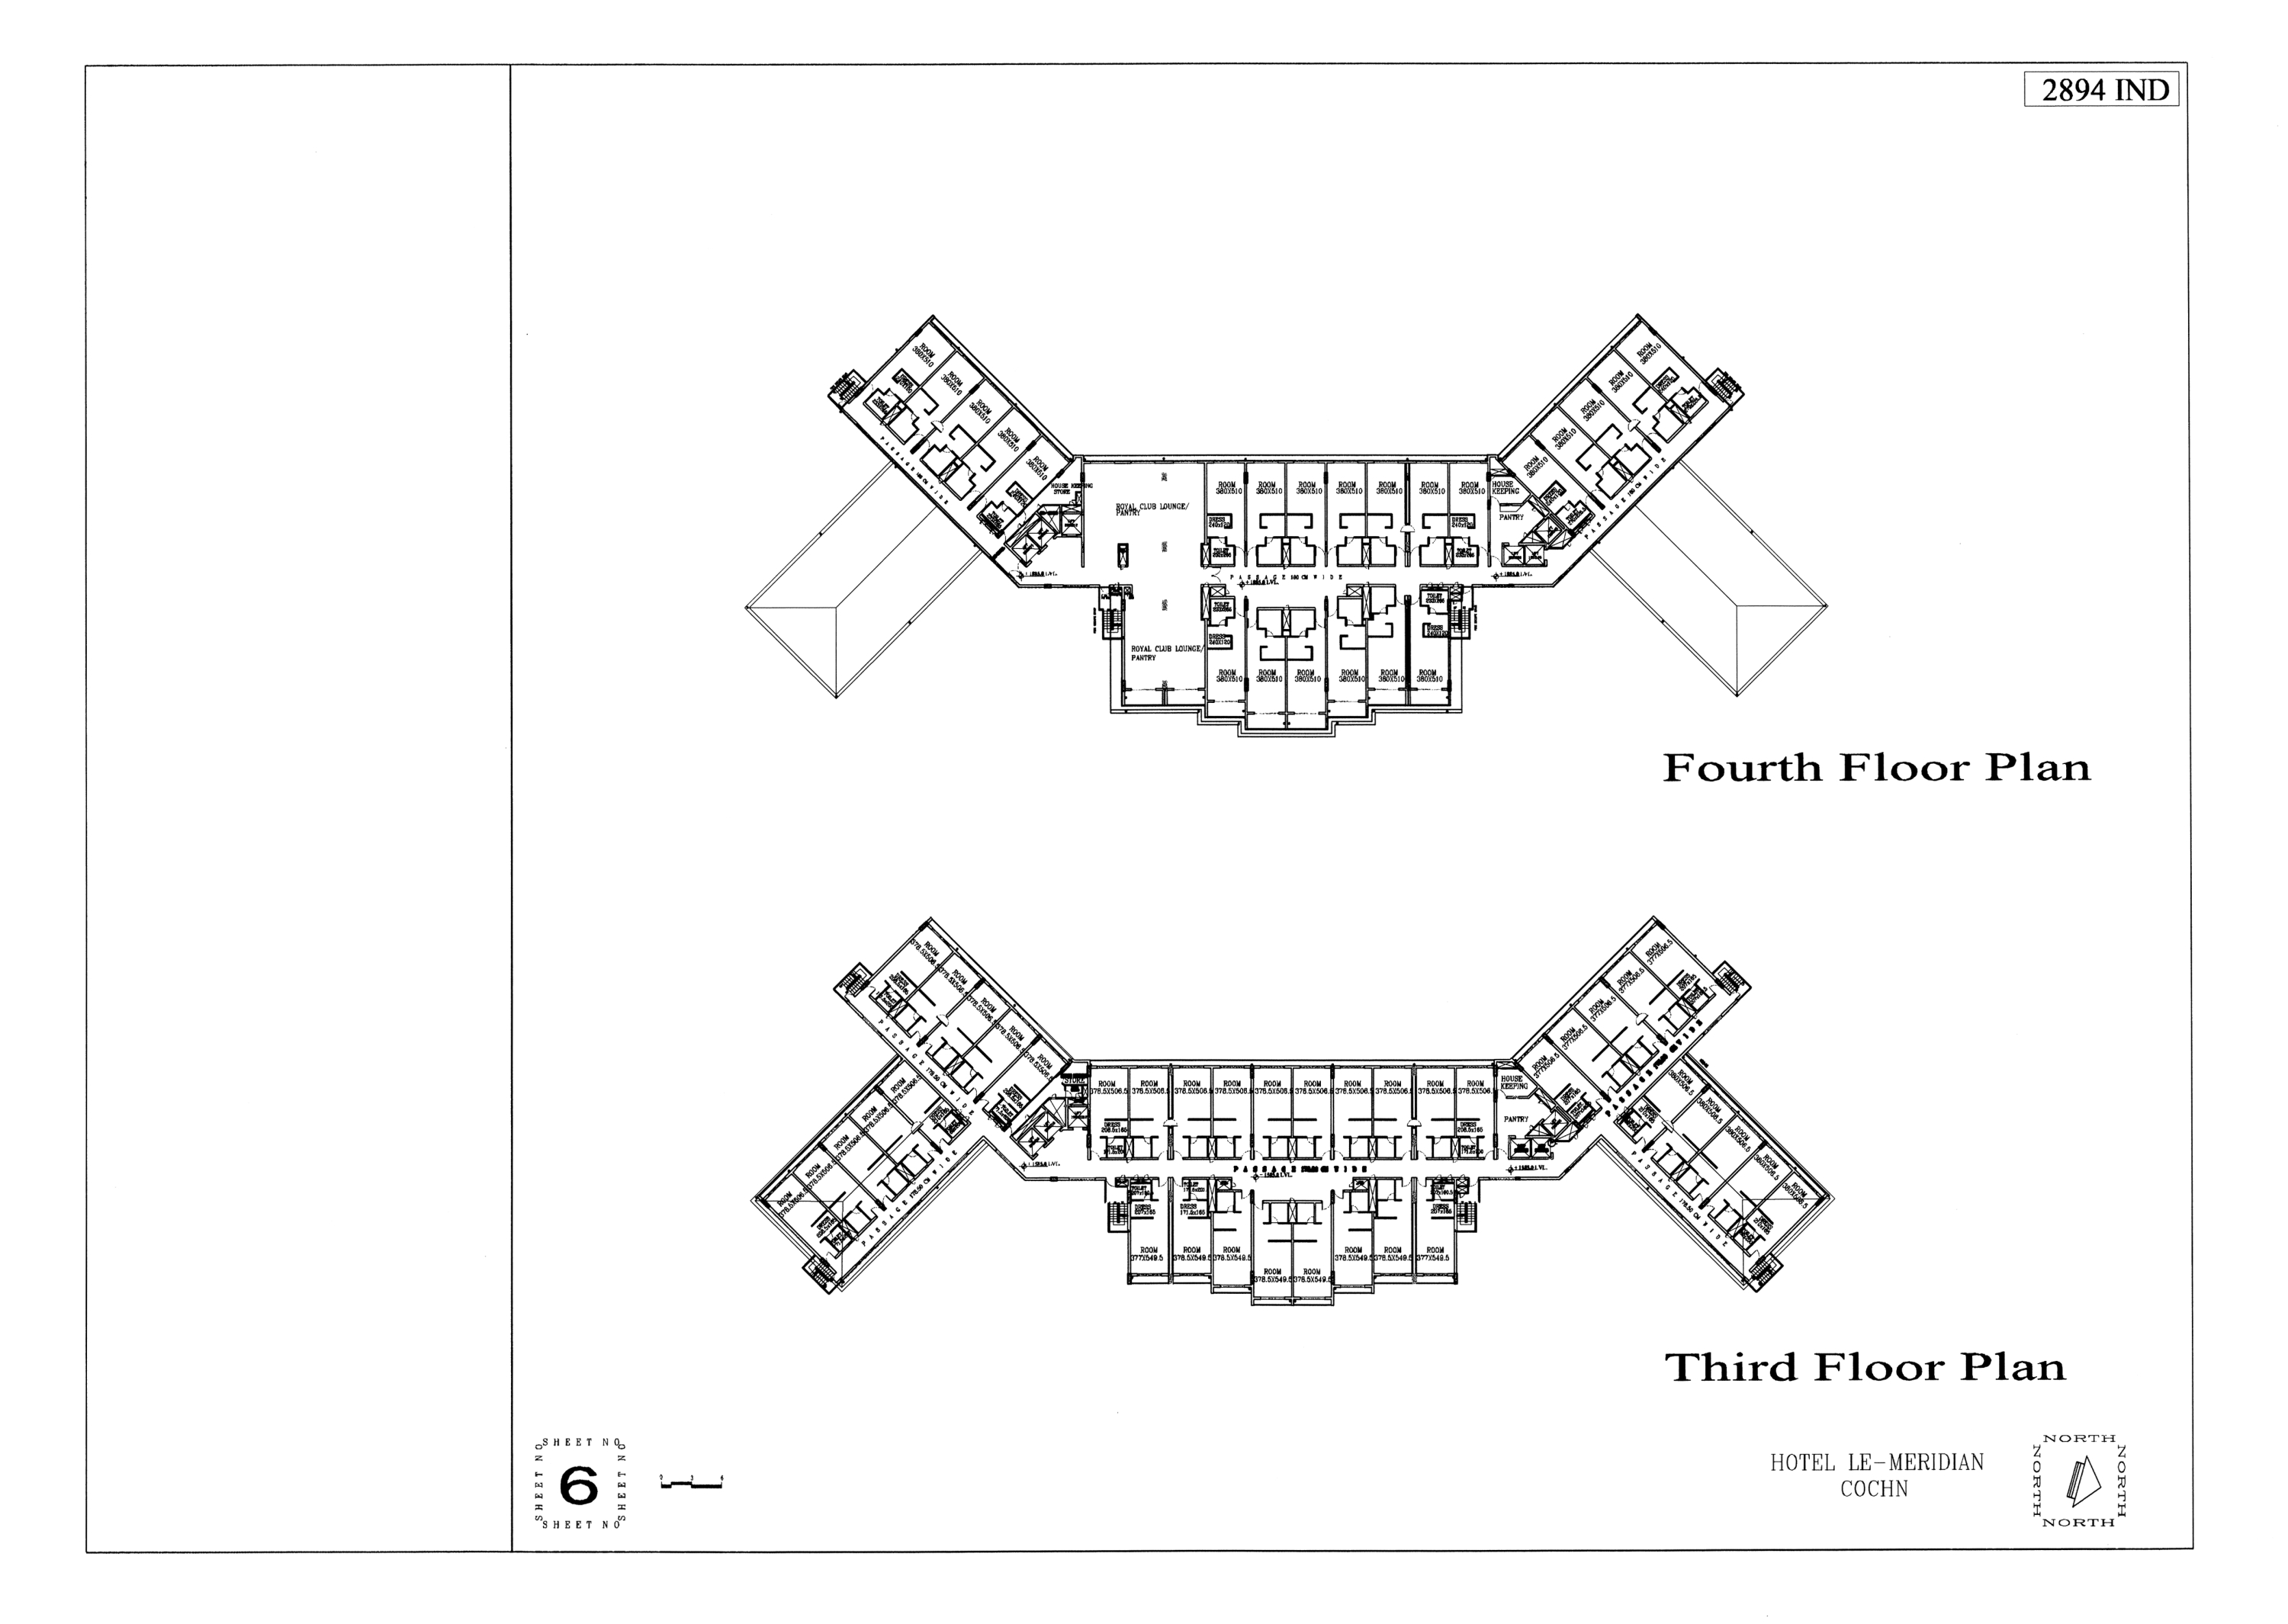 Presentation panel, hotel, third and fourth floor plans